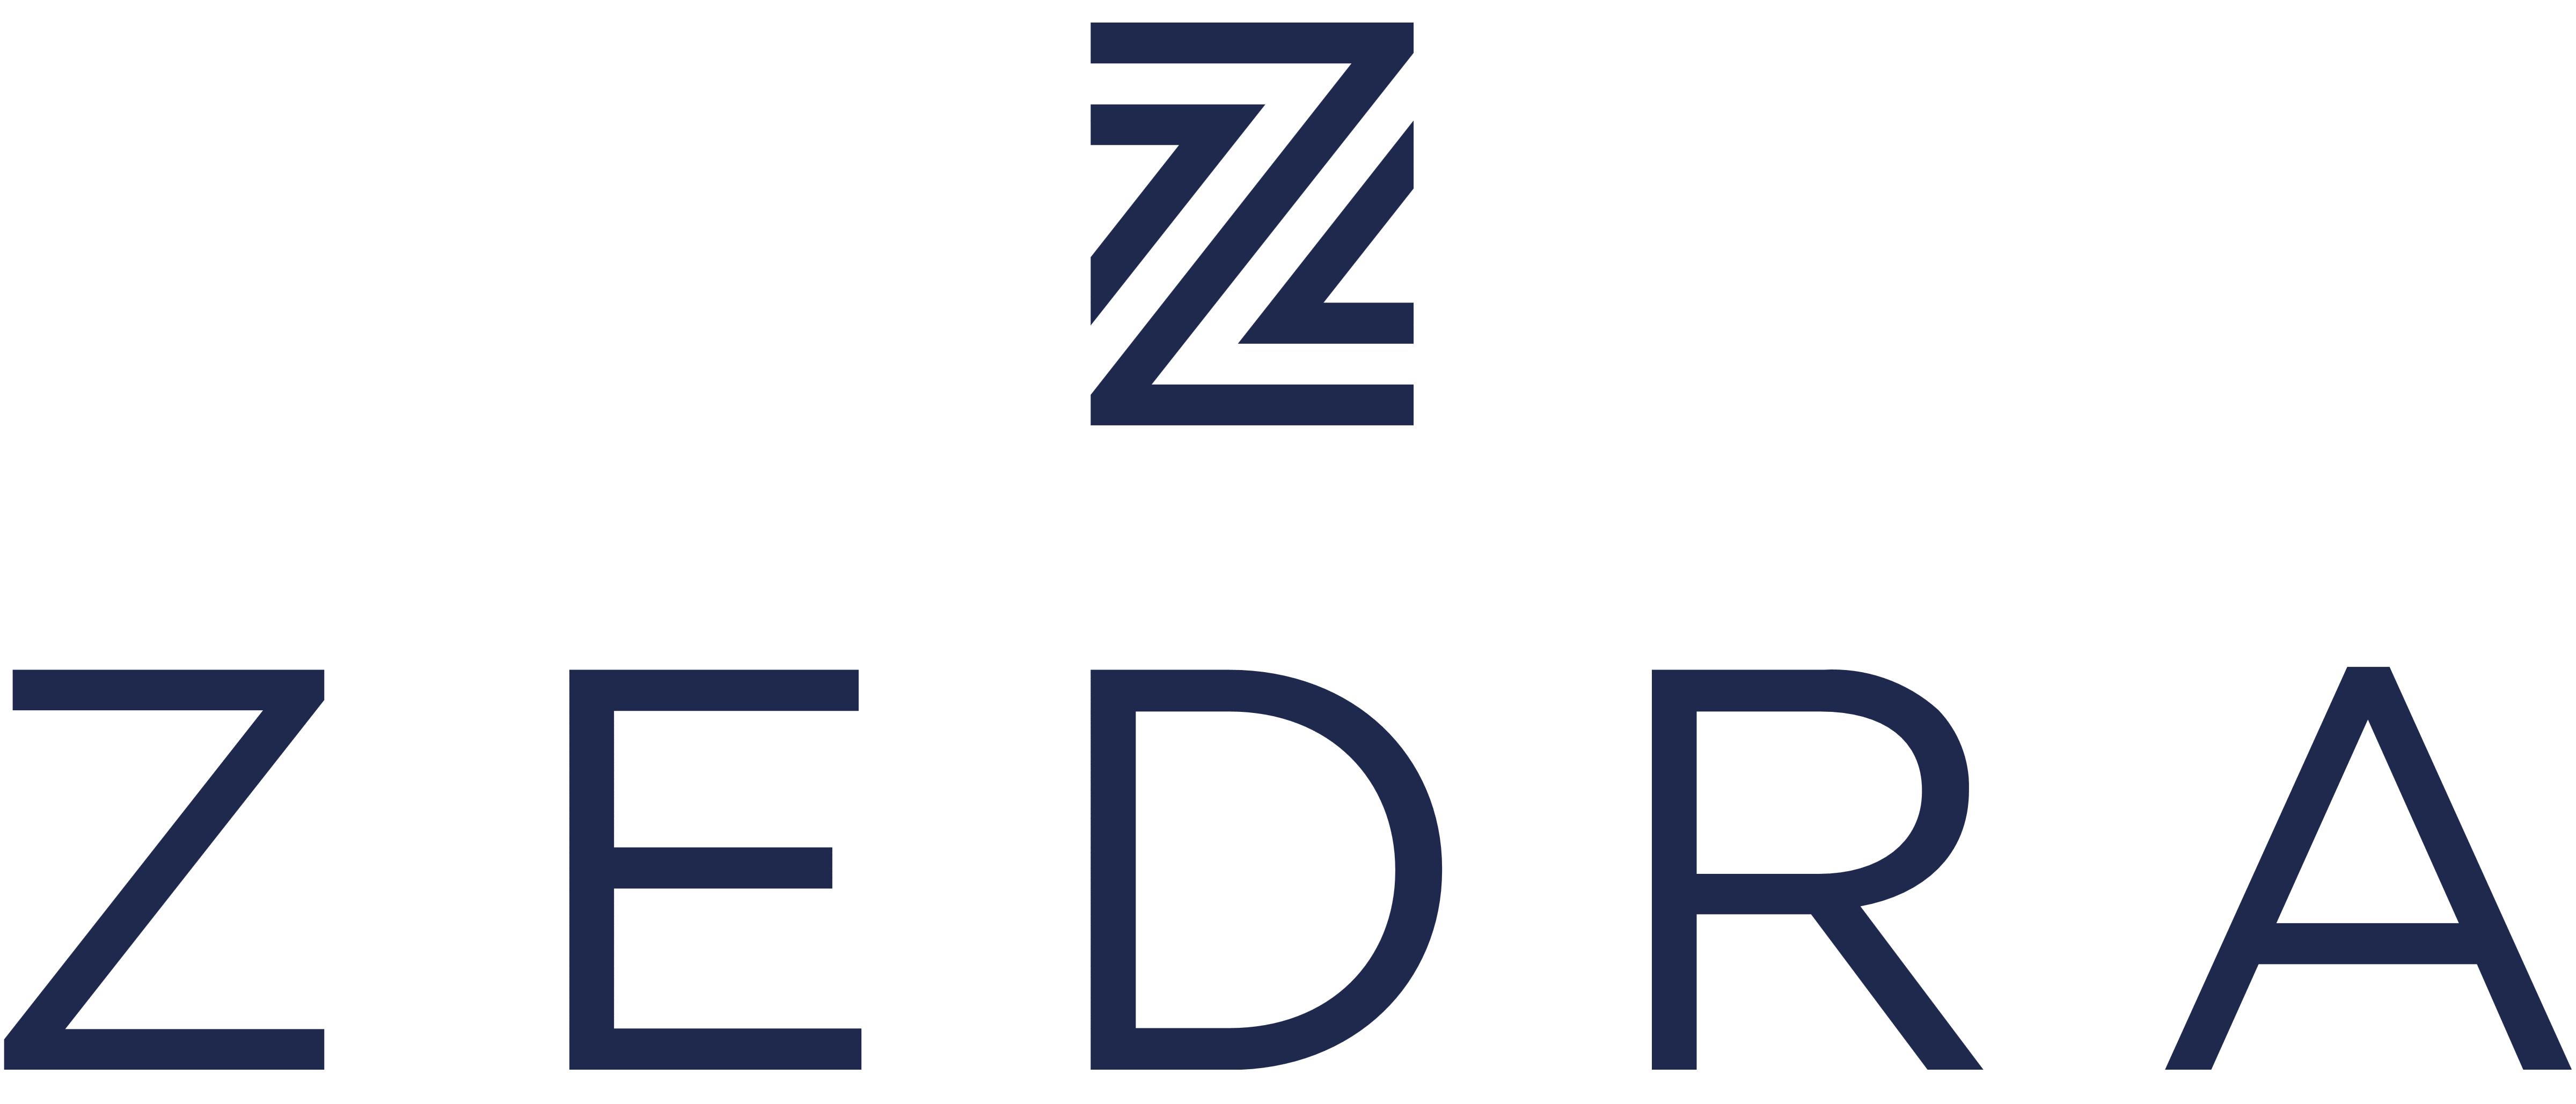 Zedra - logo - financial firm - Luxembourg - Project - Agilite Solutions